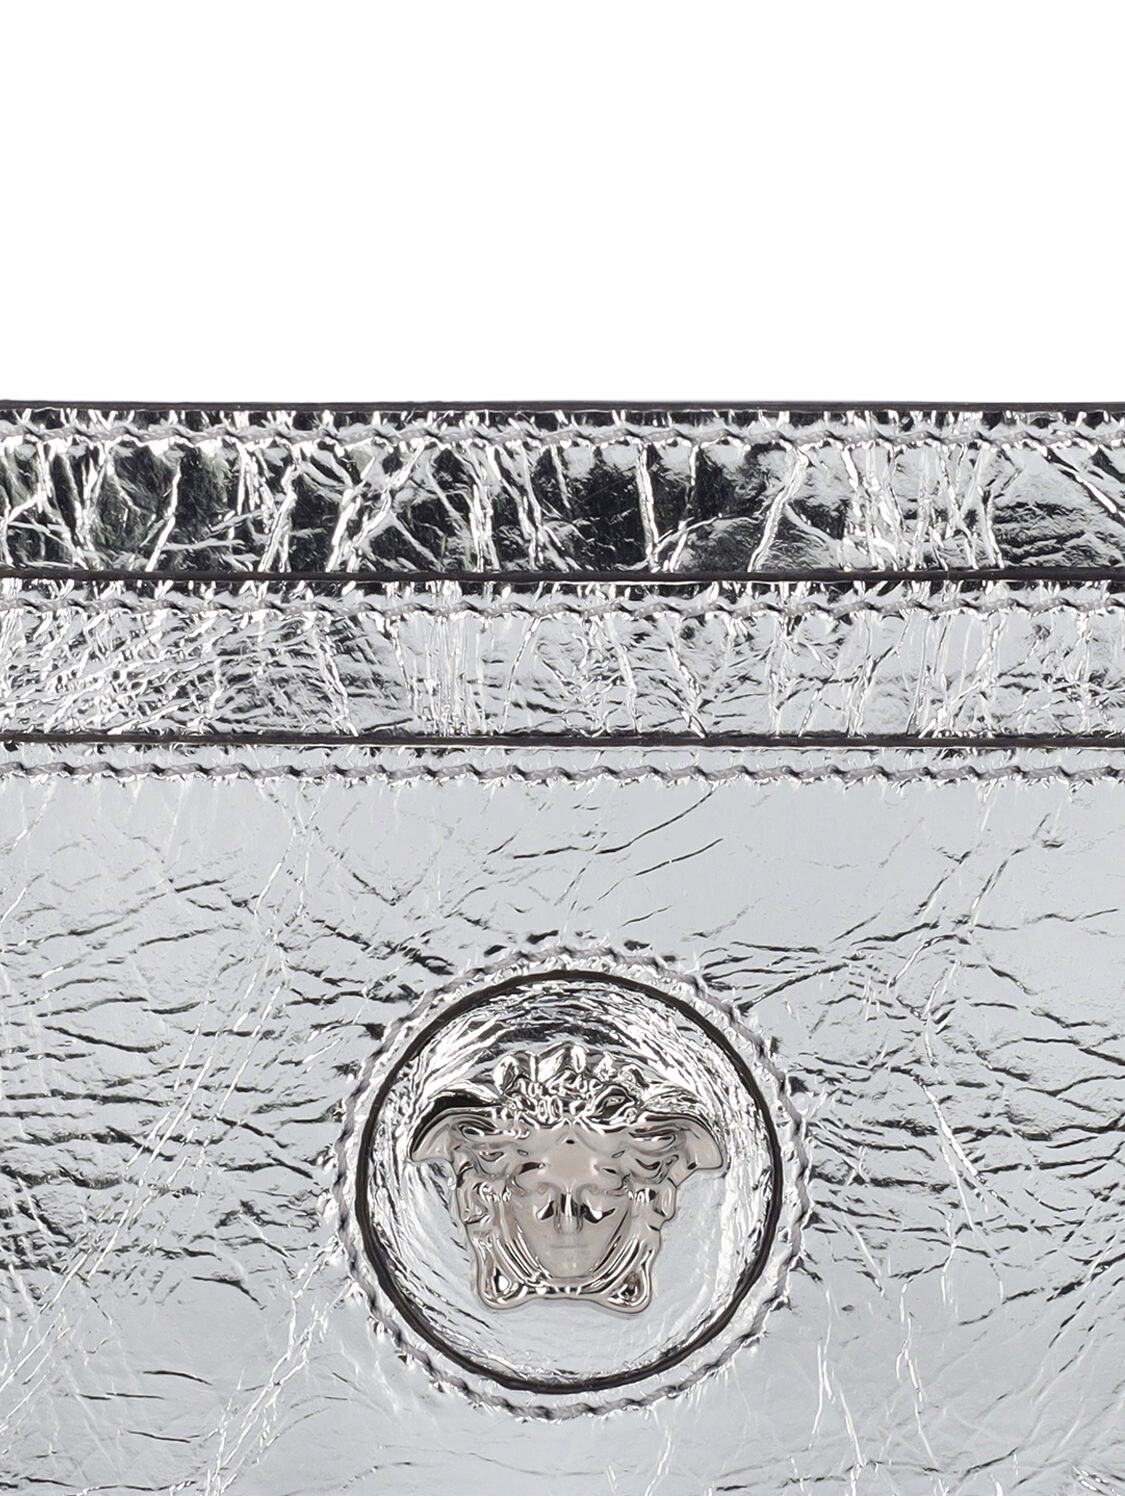 Shop Versace Medusa Leather Card Case In Silver-pa